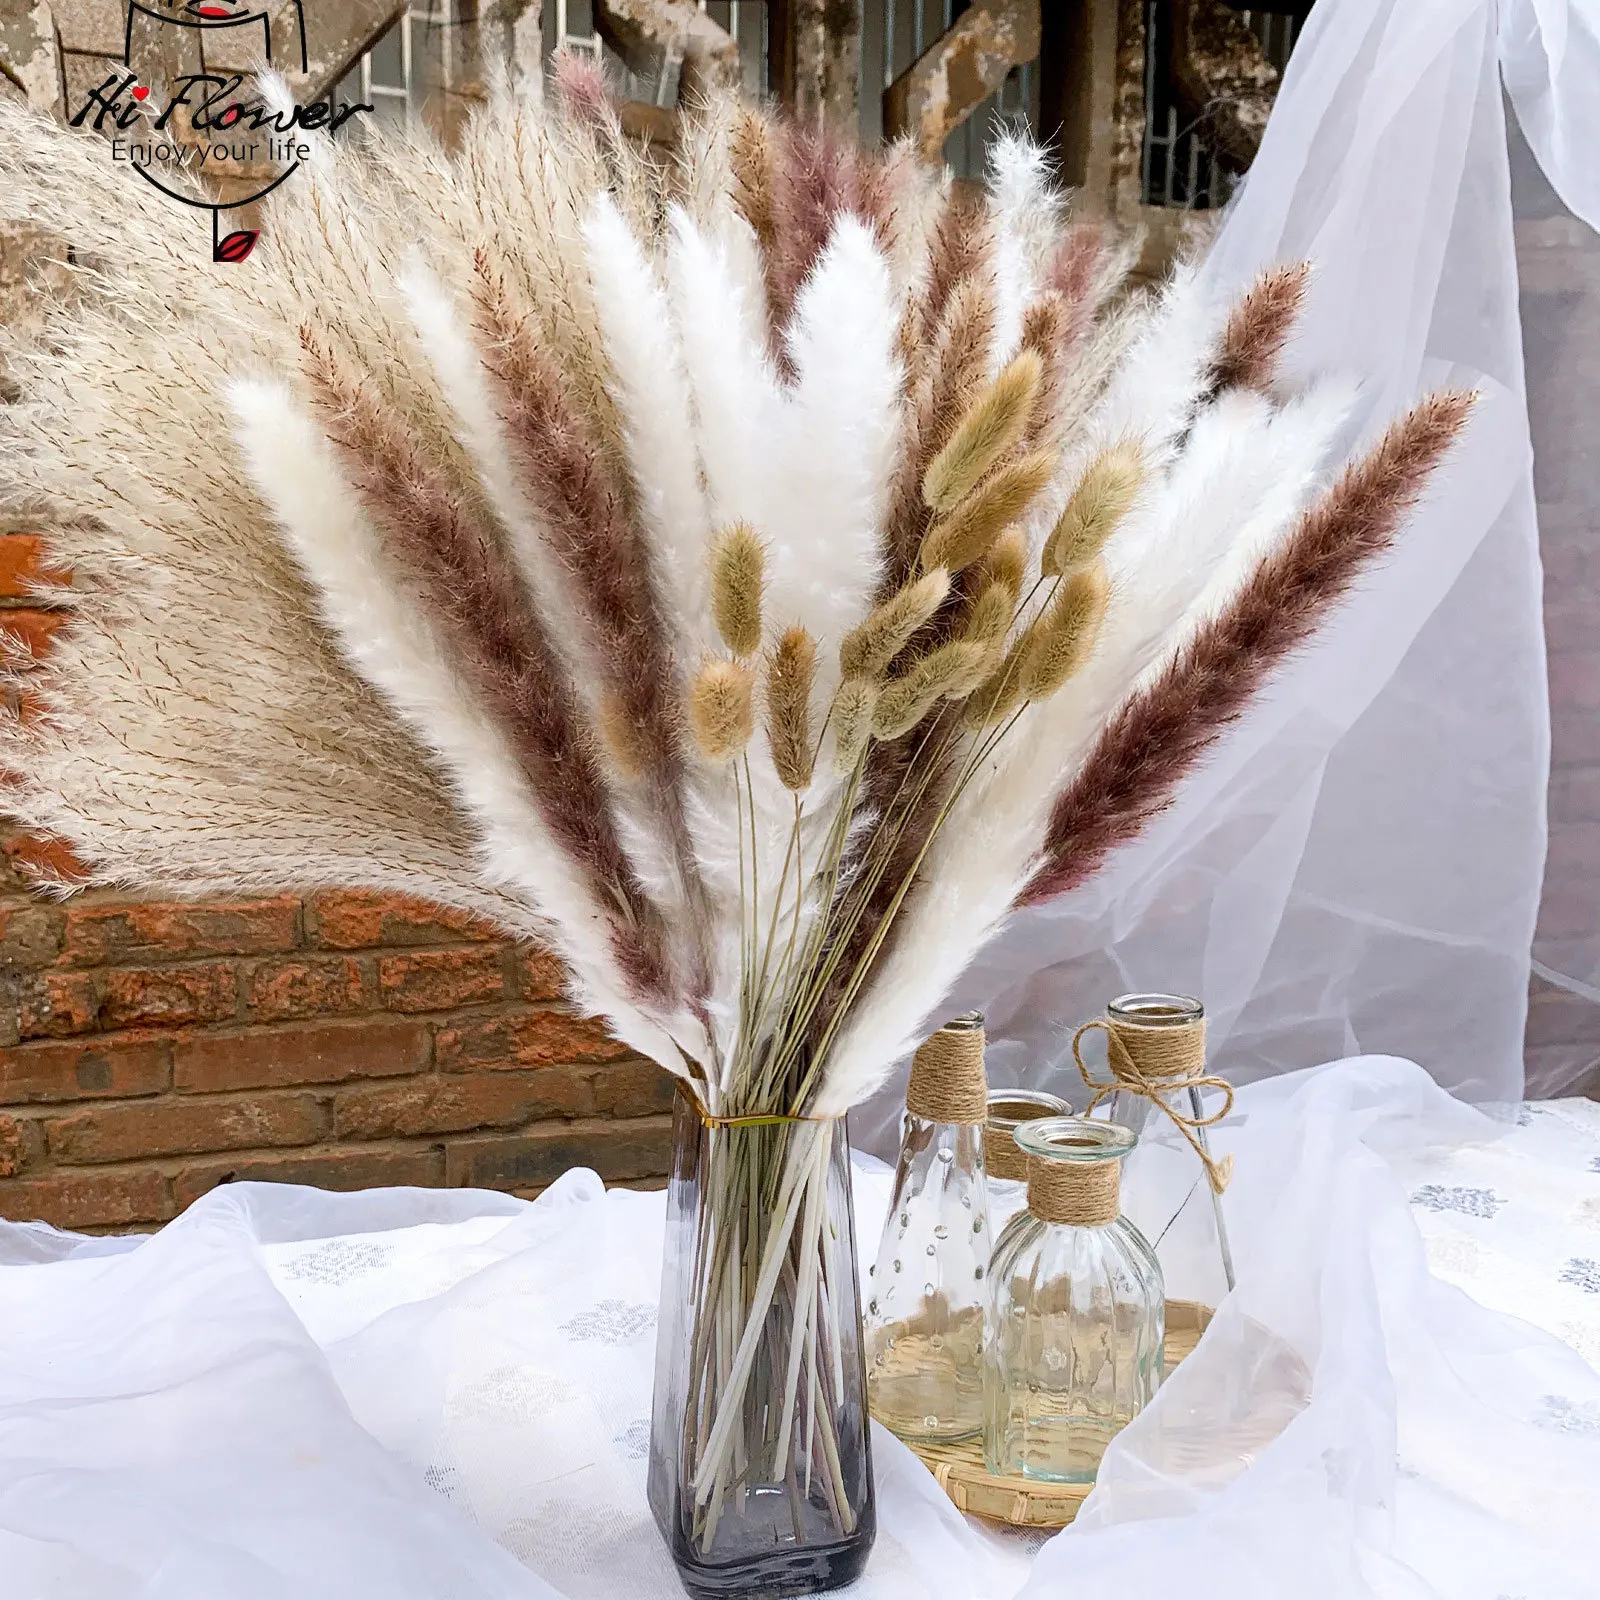 

120pcs Pampas Natural Dried Flower Bouquet Boho Christmas Wedding Decor Bunny Tail Grass Artificial Flowers Reed Home Decoration